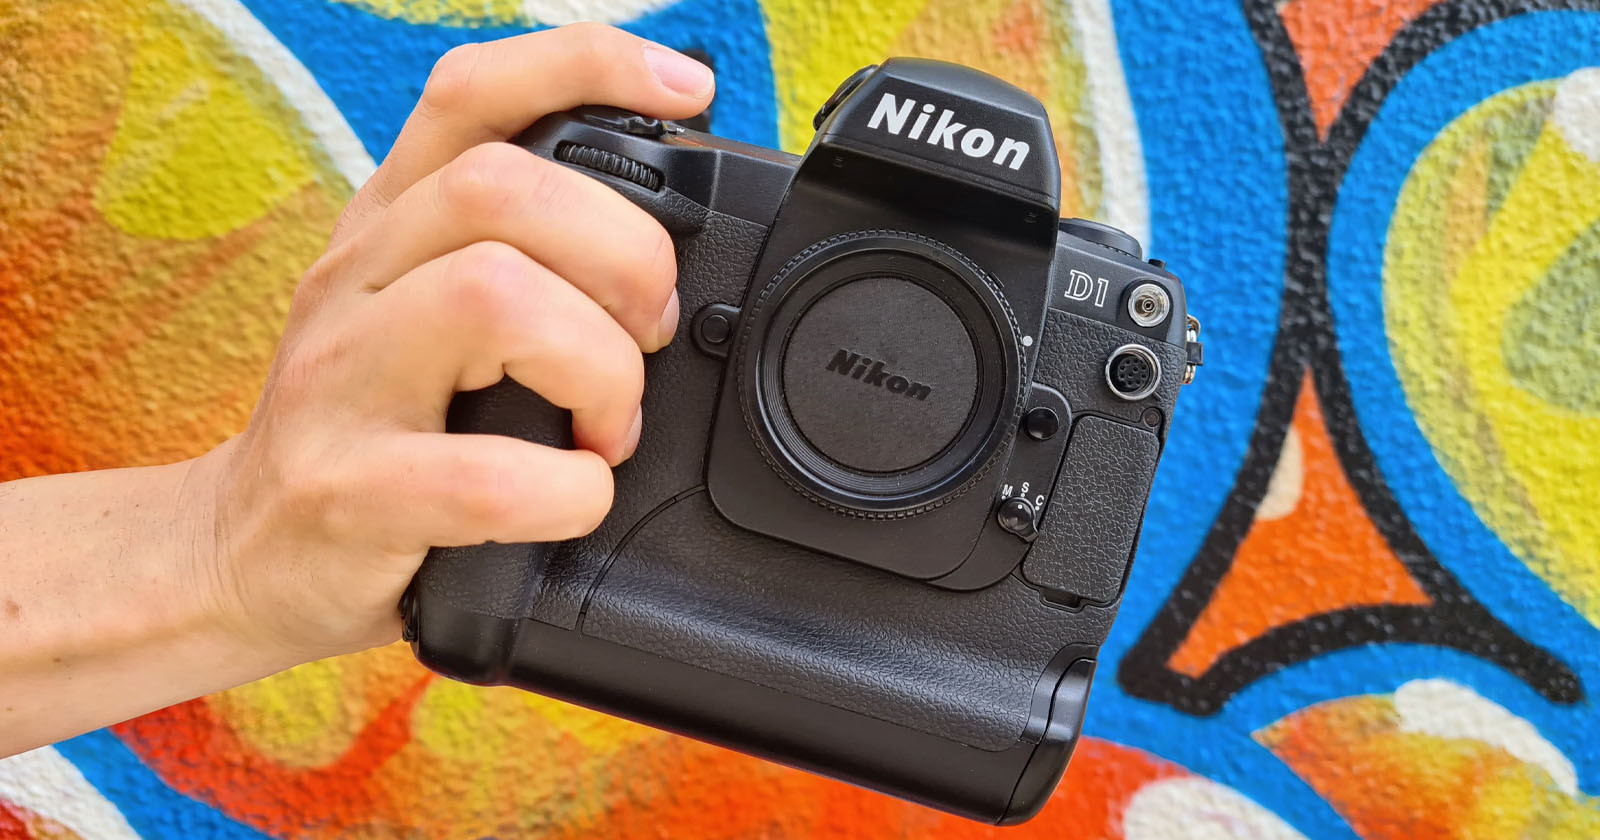  revisiting nikon first dslr years later 